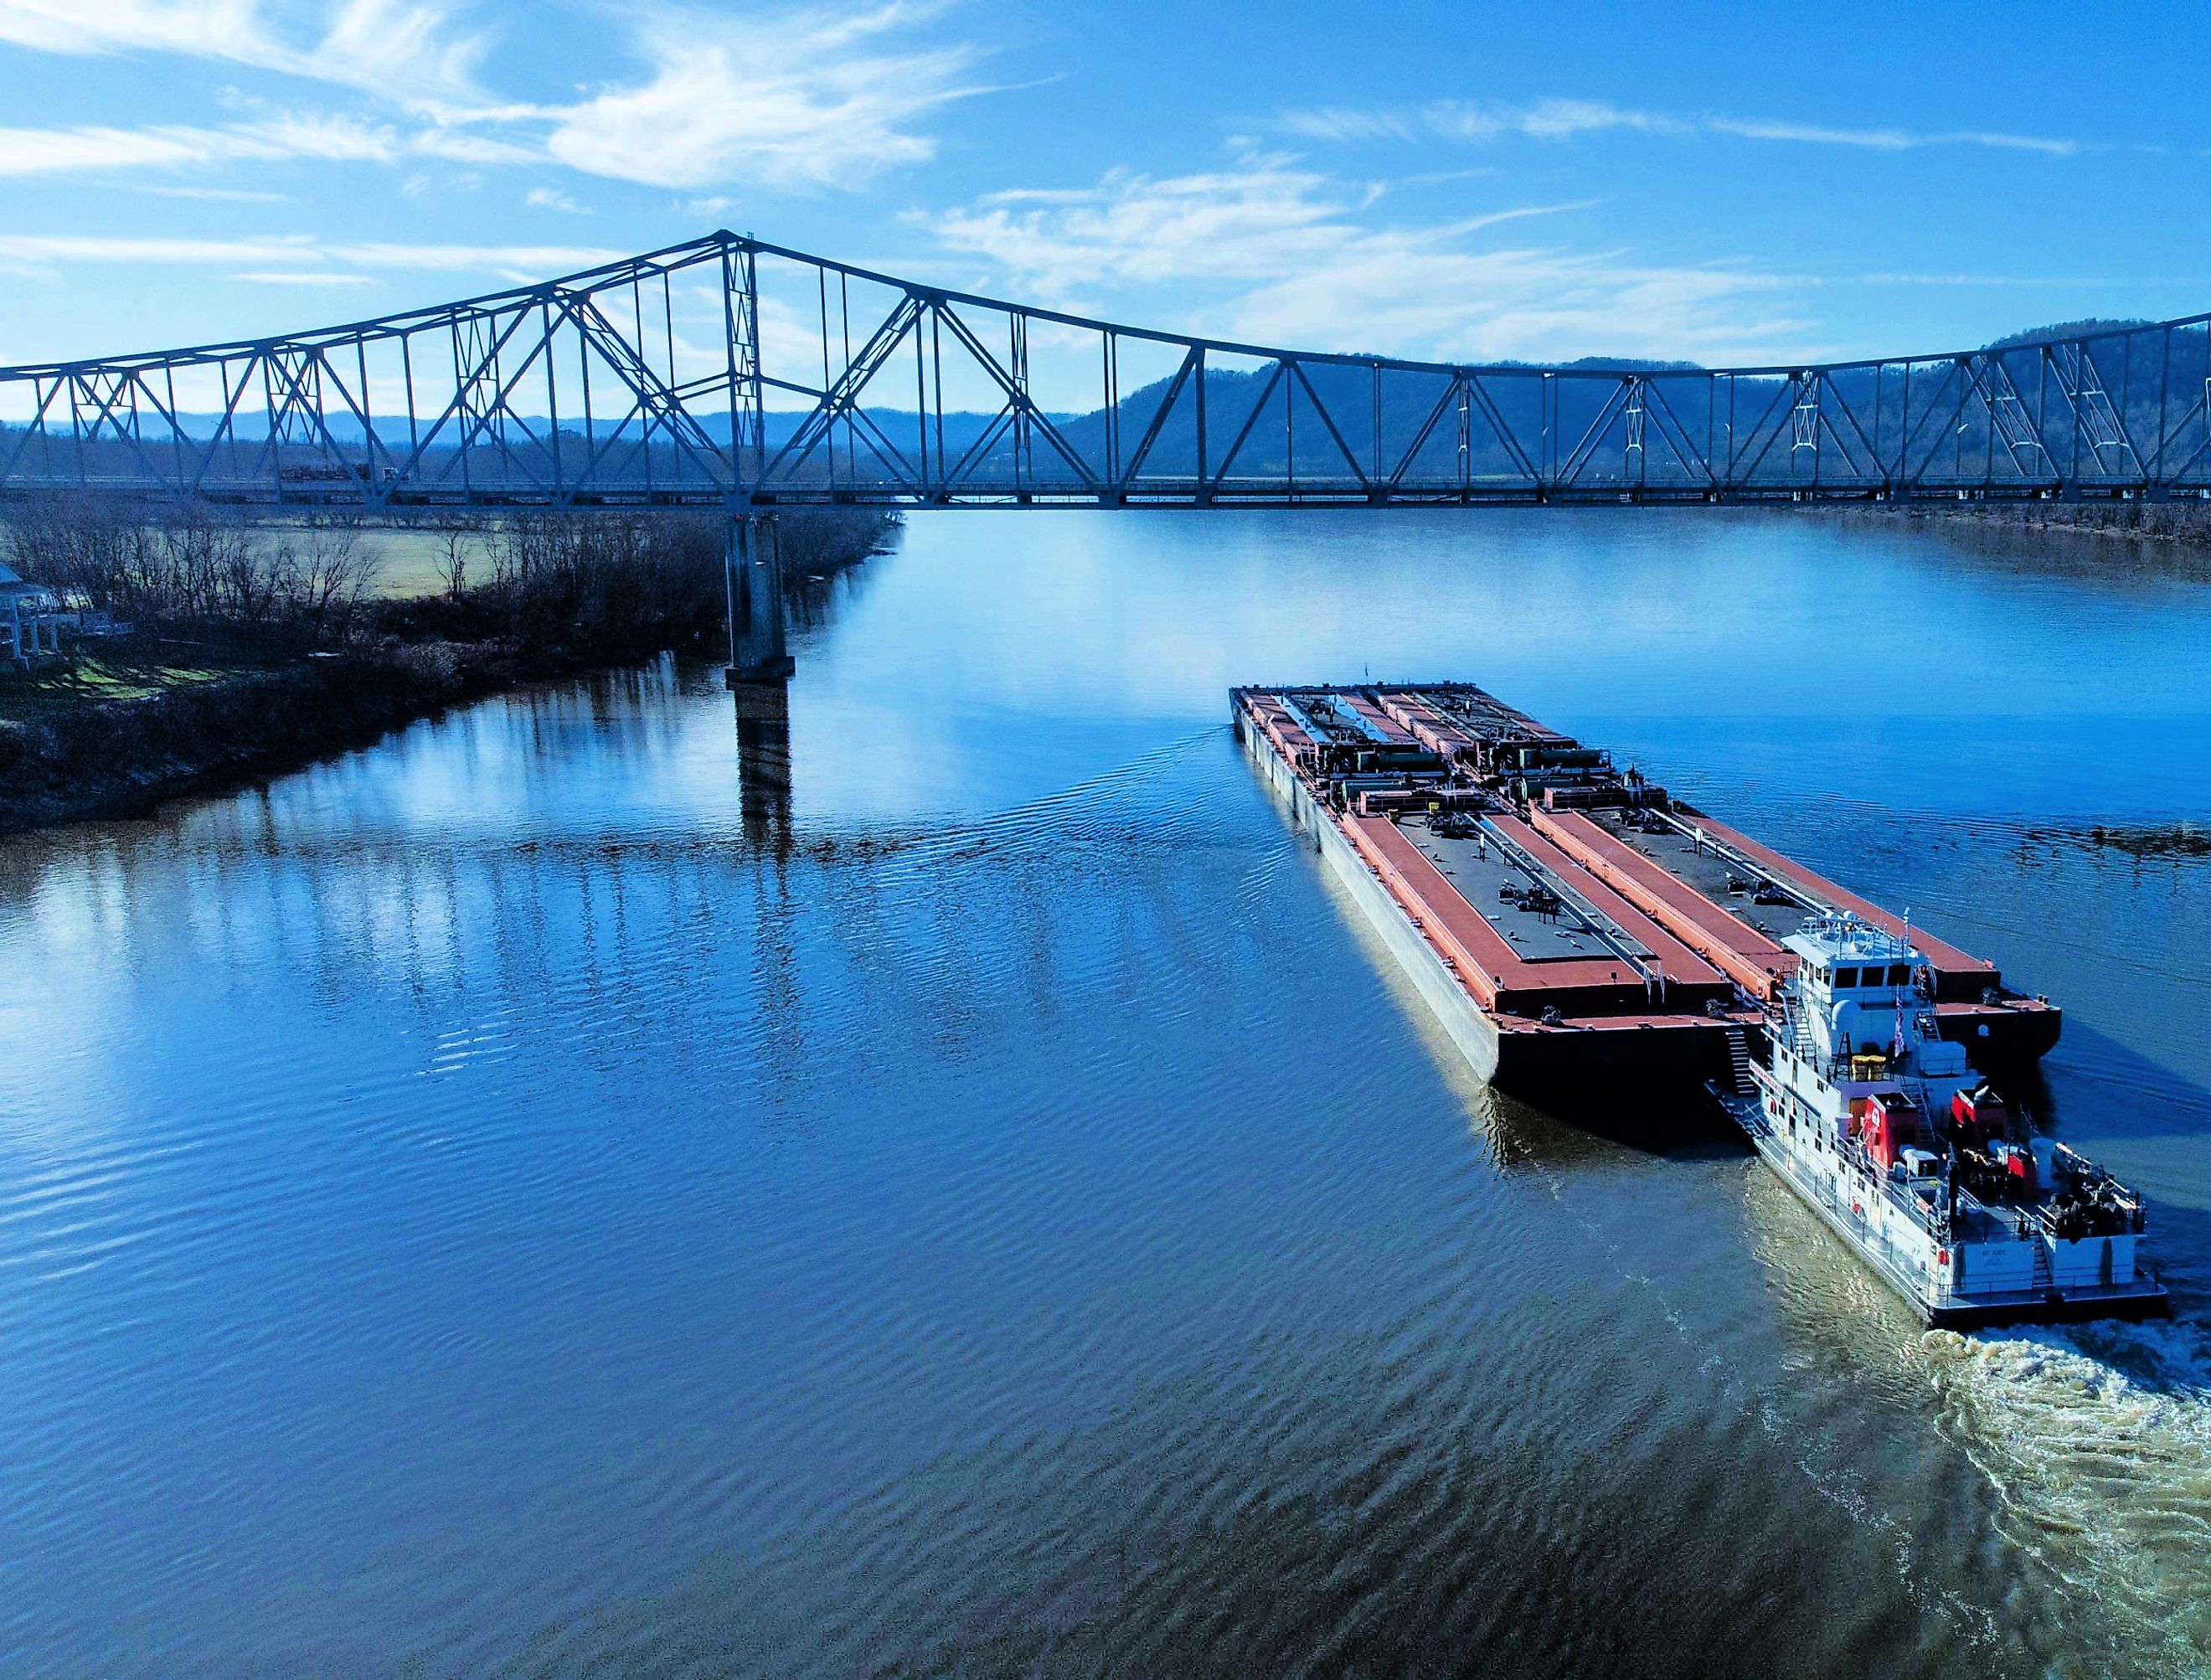 A towboat on the Ohio River in Portsmouth, OH. Image credit: Hawkeye Dronography via Shutterstock